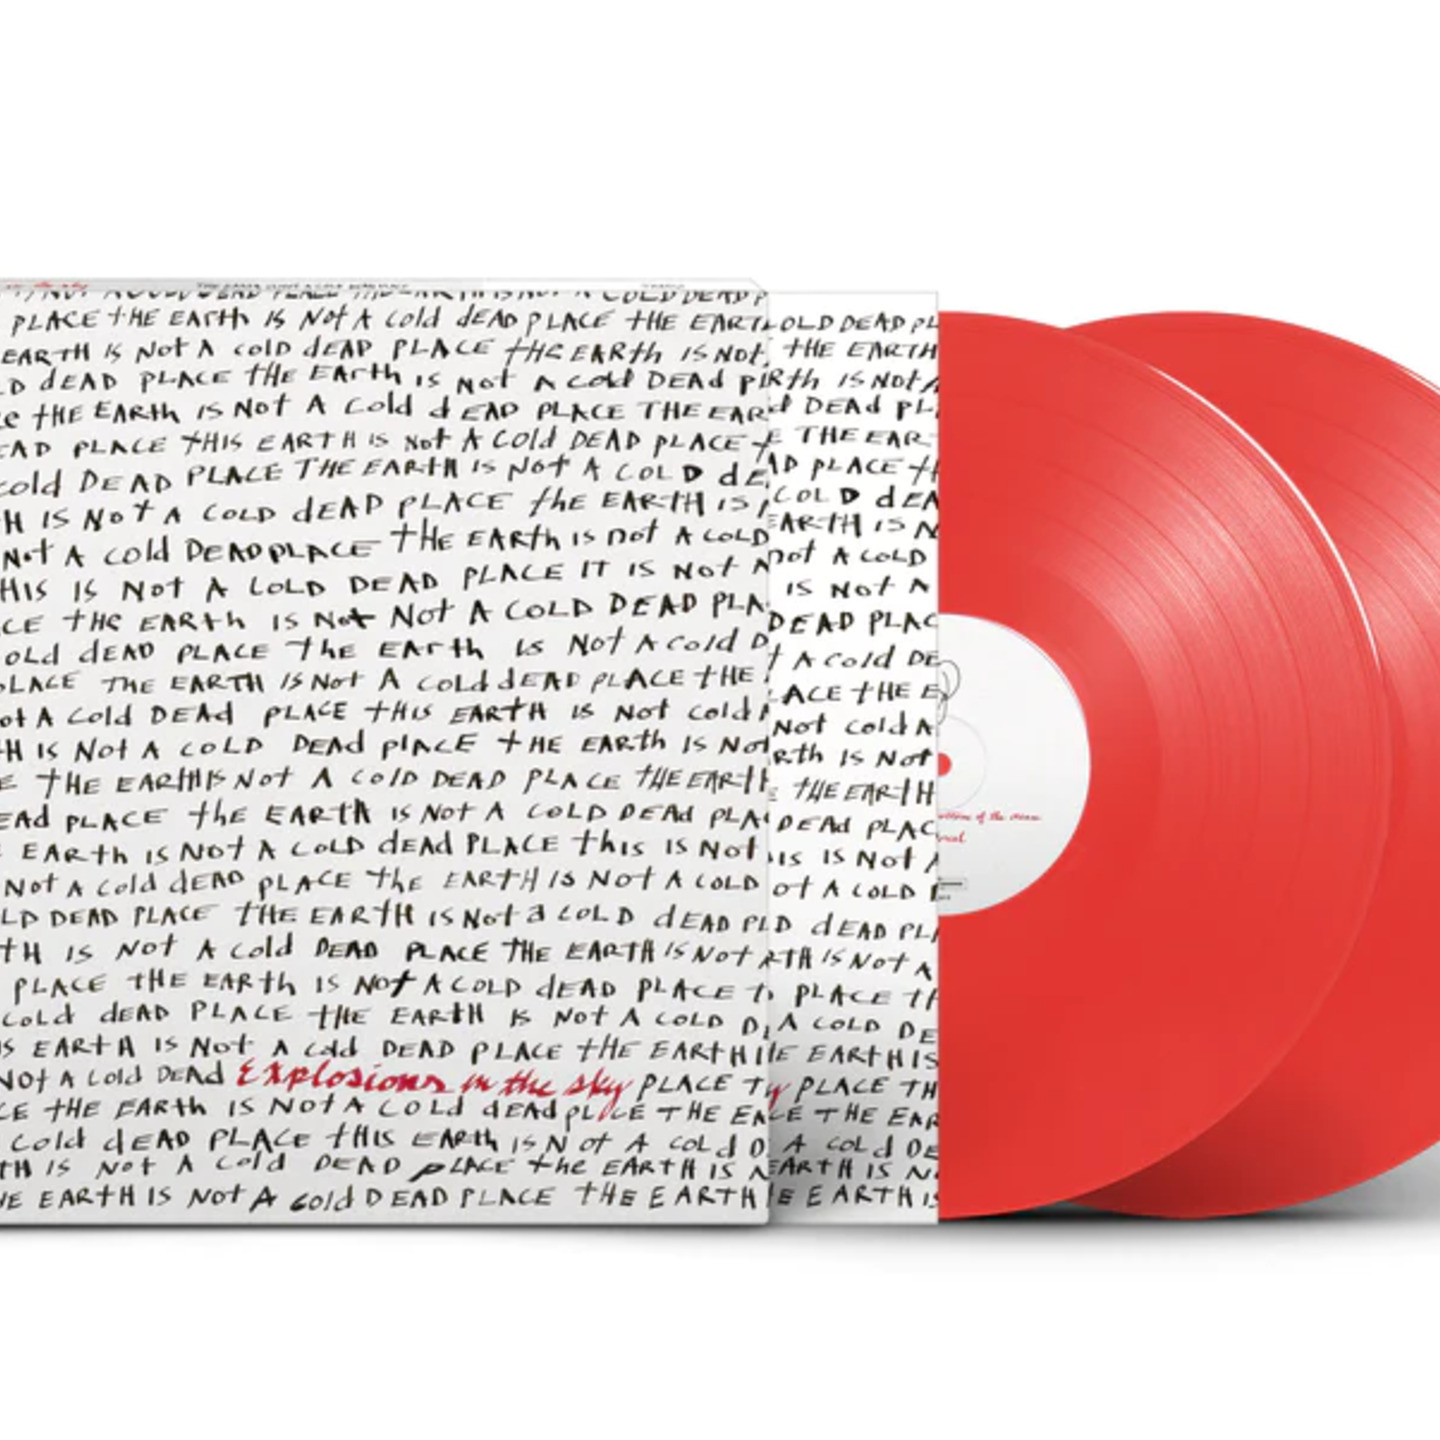 EXPLOSIONS IN THE SKY - The Earth Is Not A Cold Dead Place 2xLP Anniversary Opaque Red vinyl